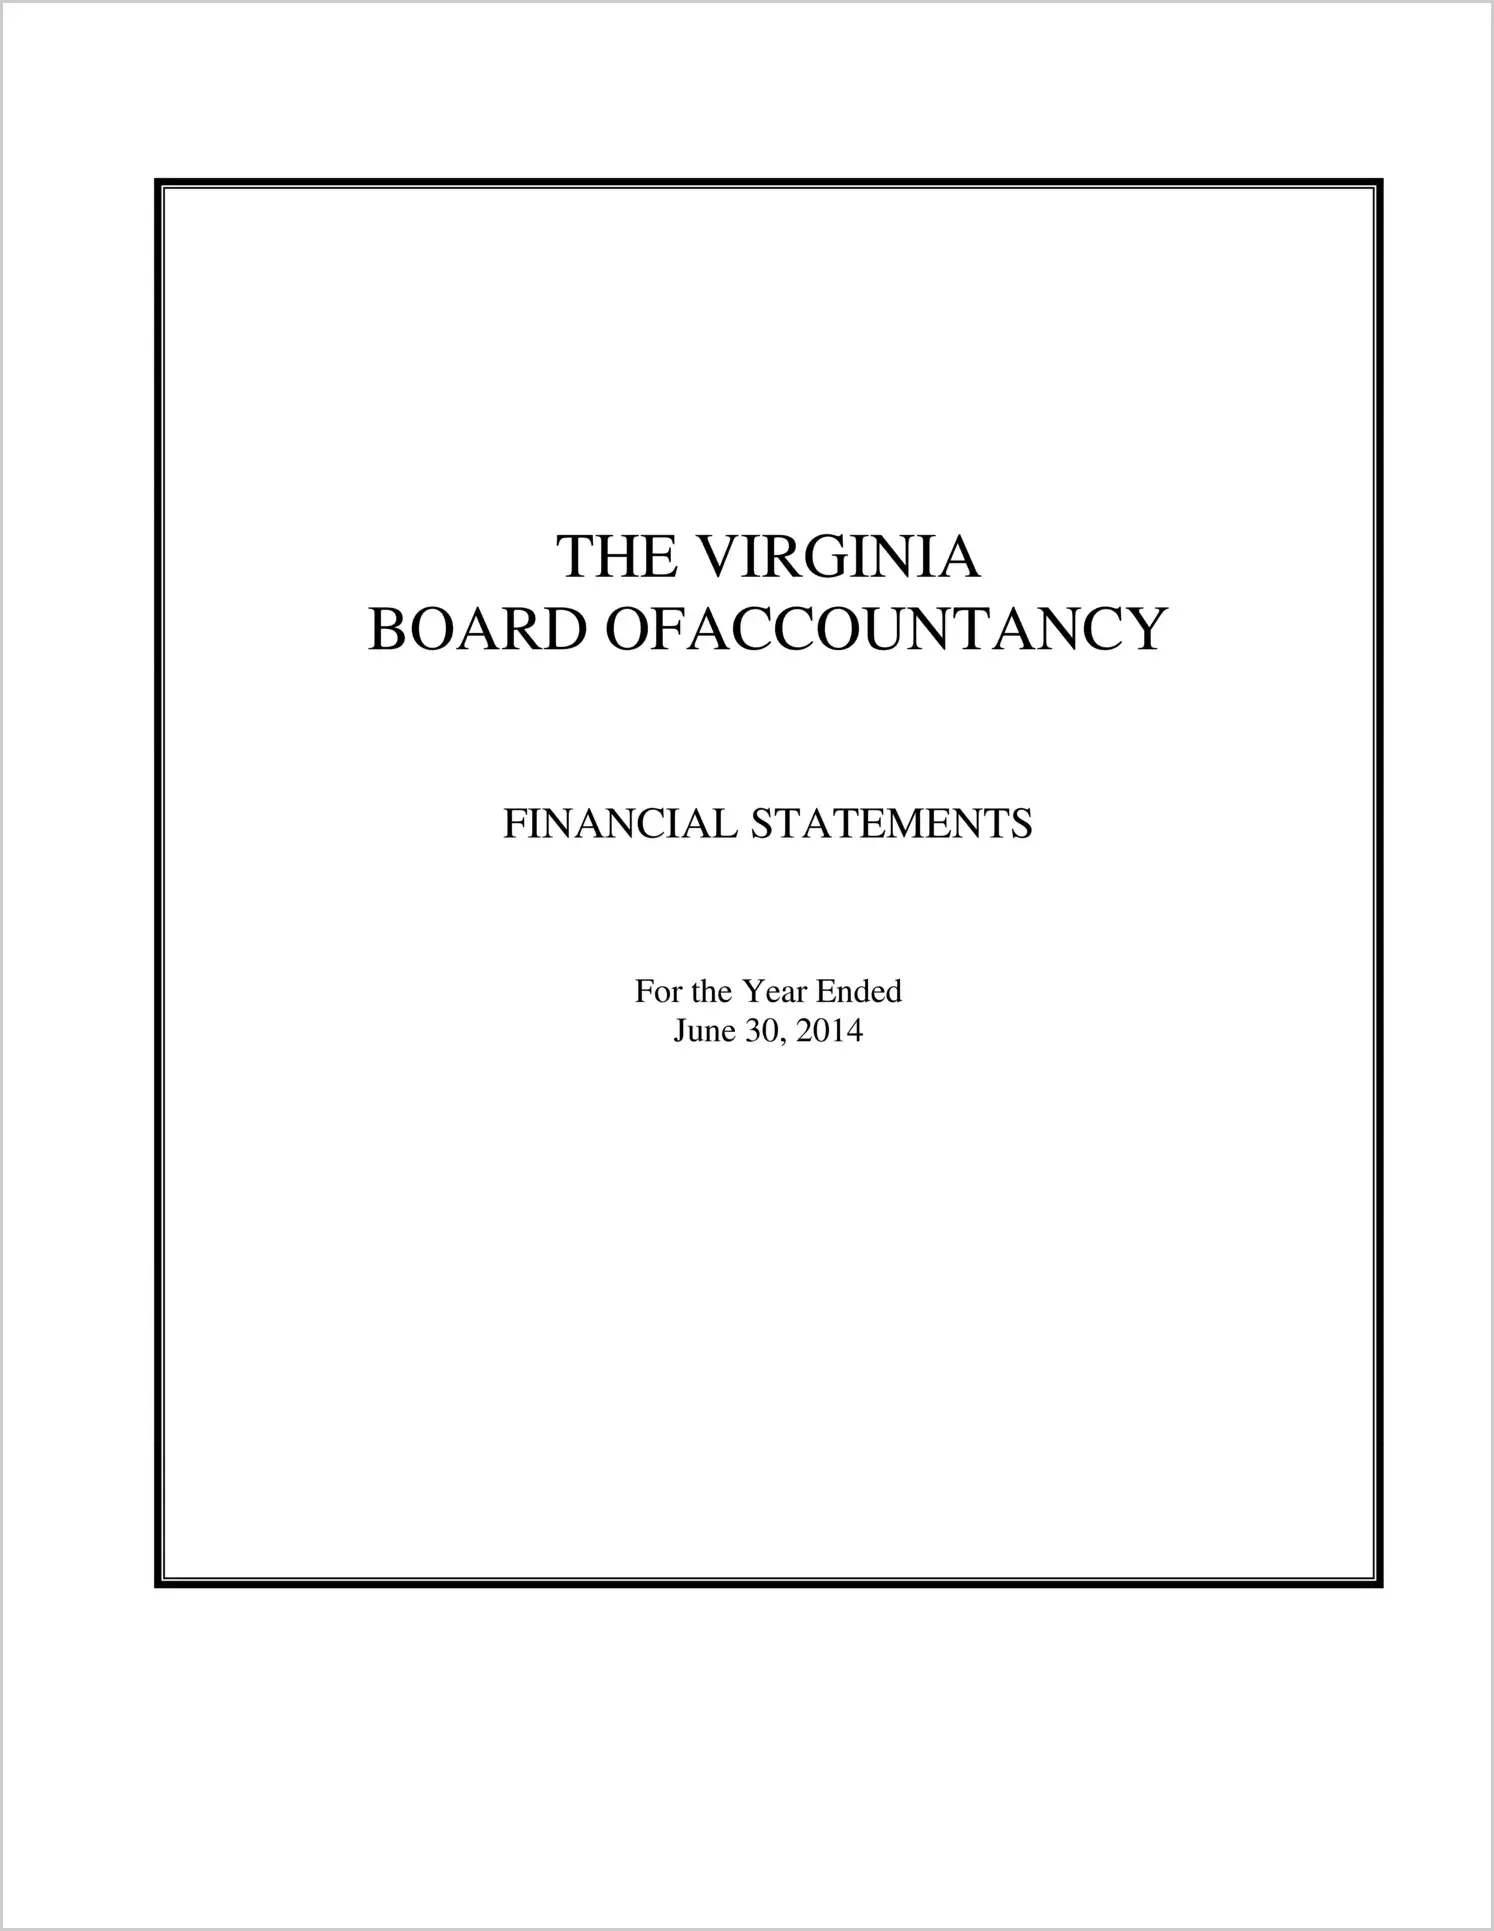 Virginia Board of Accountancy Financial Statements for the year ended June 30, 2014